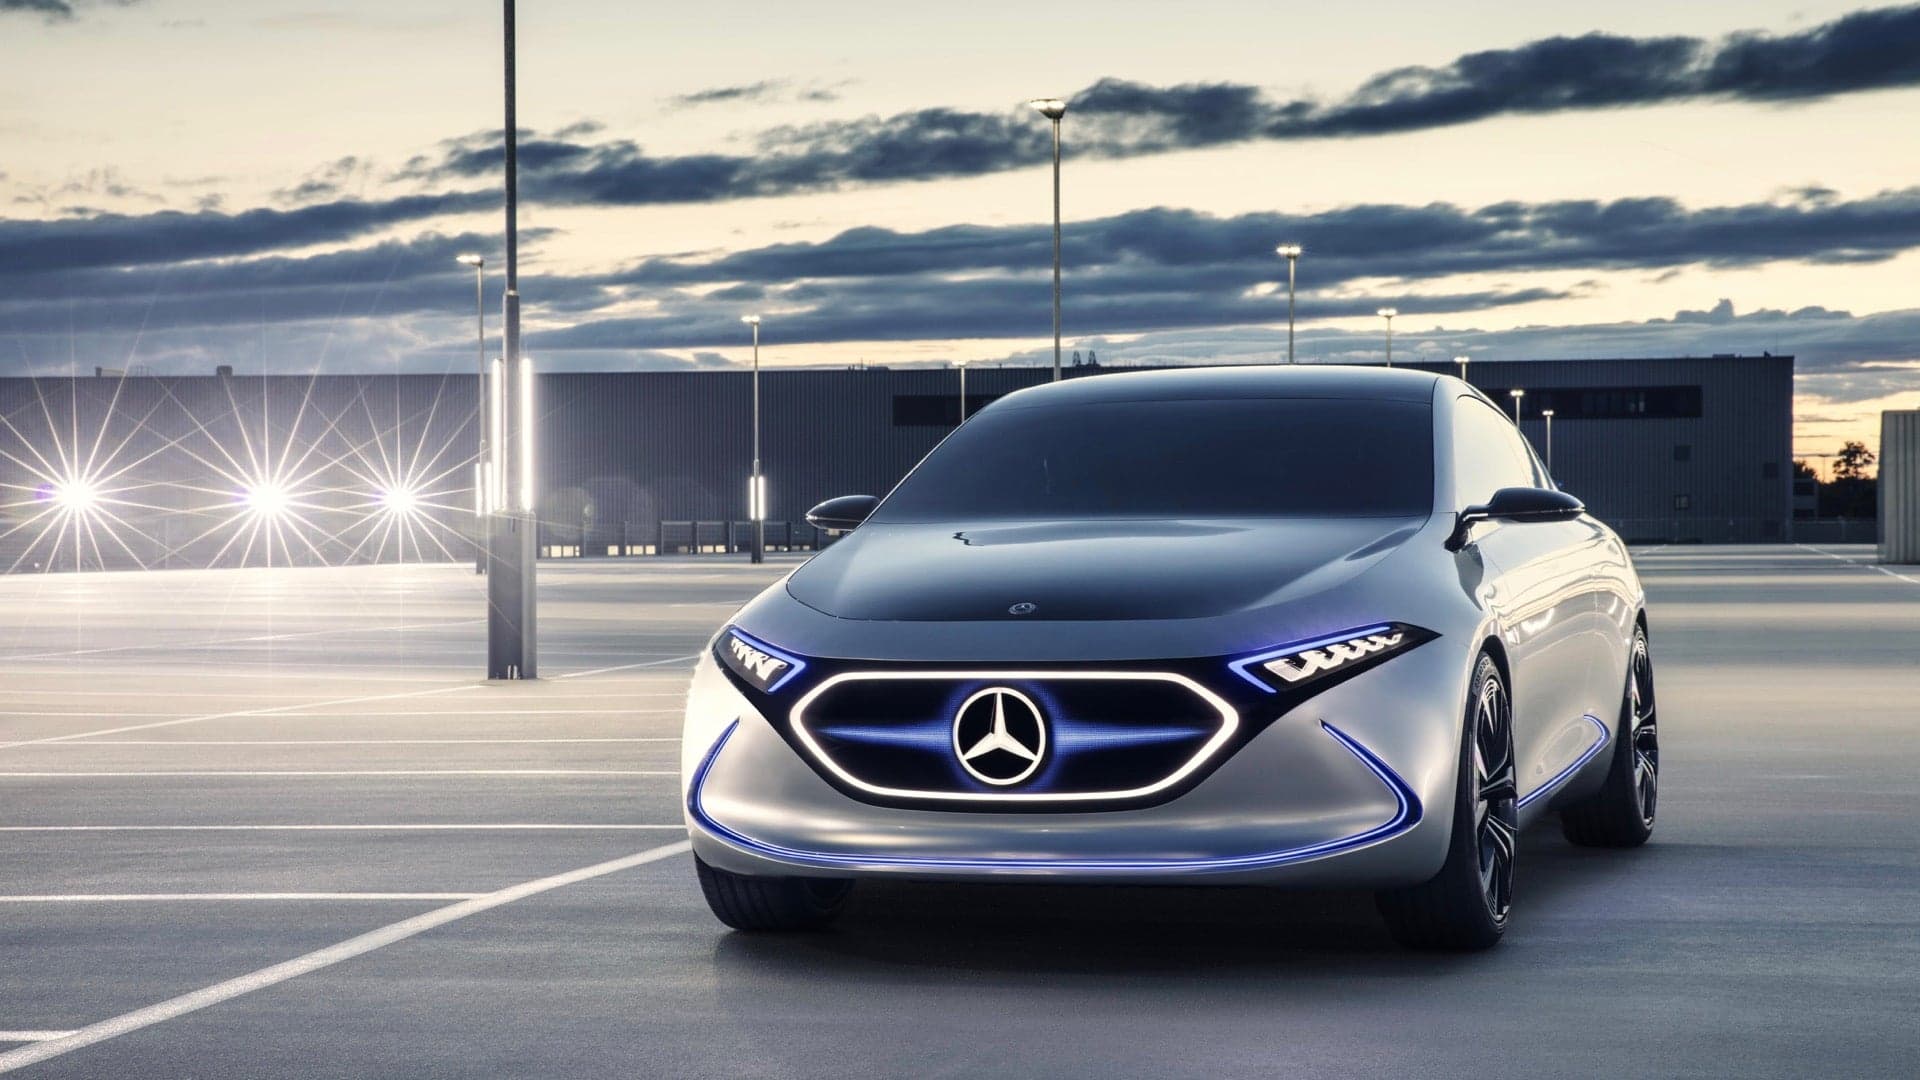 Daimler Fears That Switch to Electric Cars Will Disrupt Supply Chain